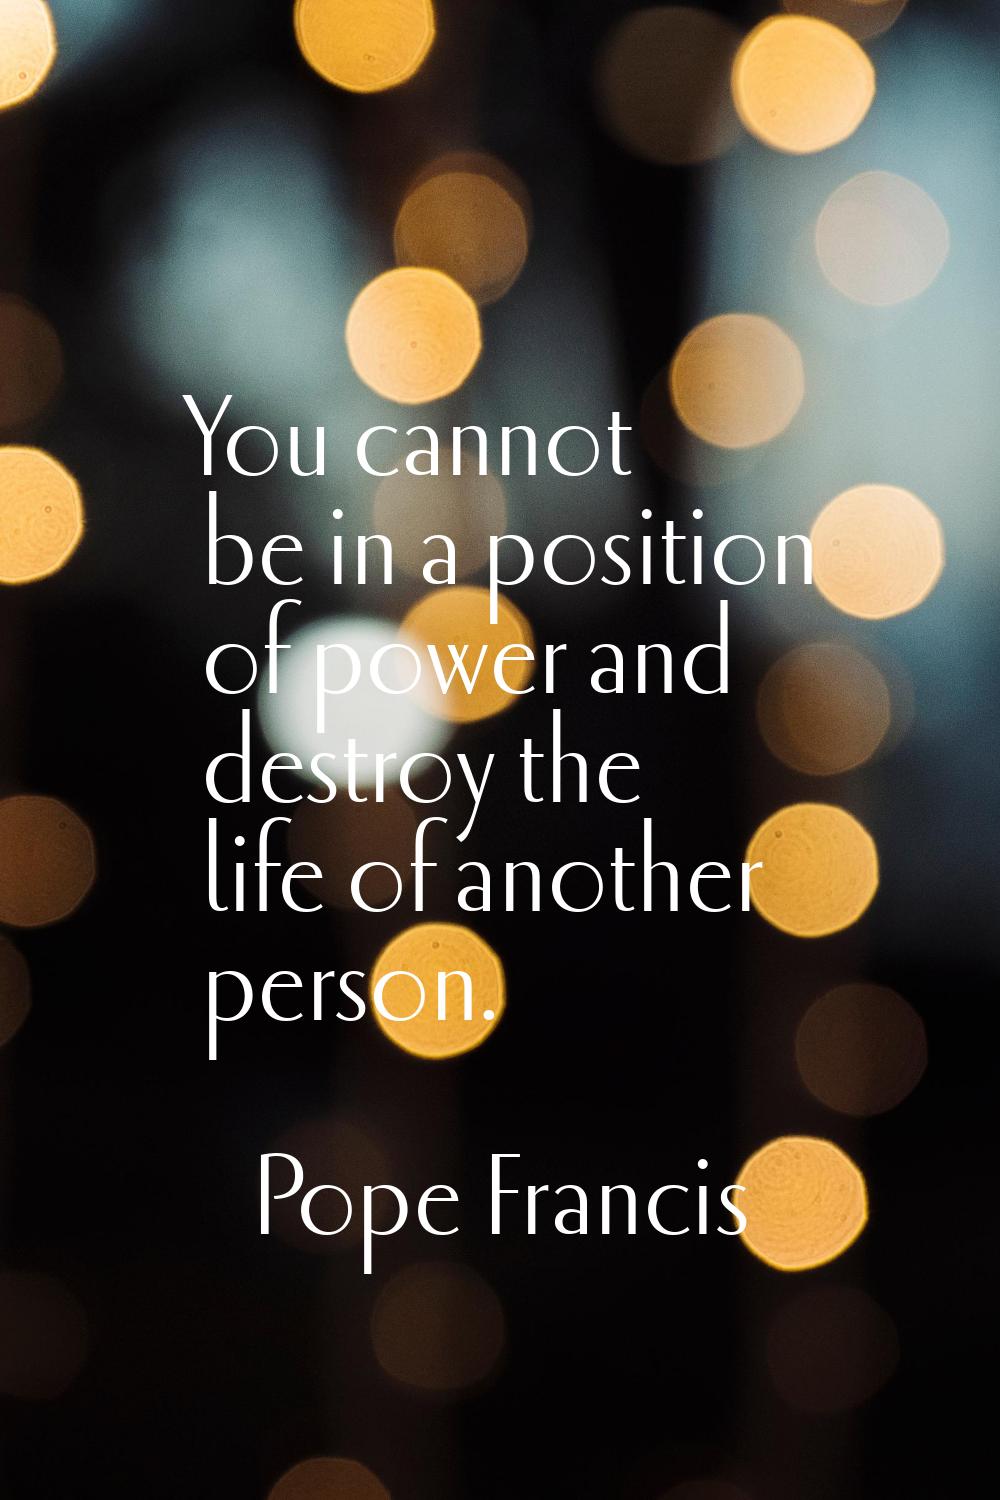 You cannot be in a position of power and destroy the life of another person.